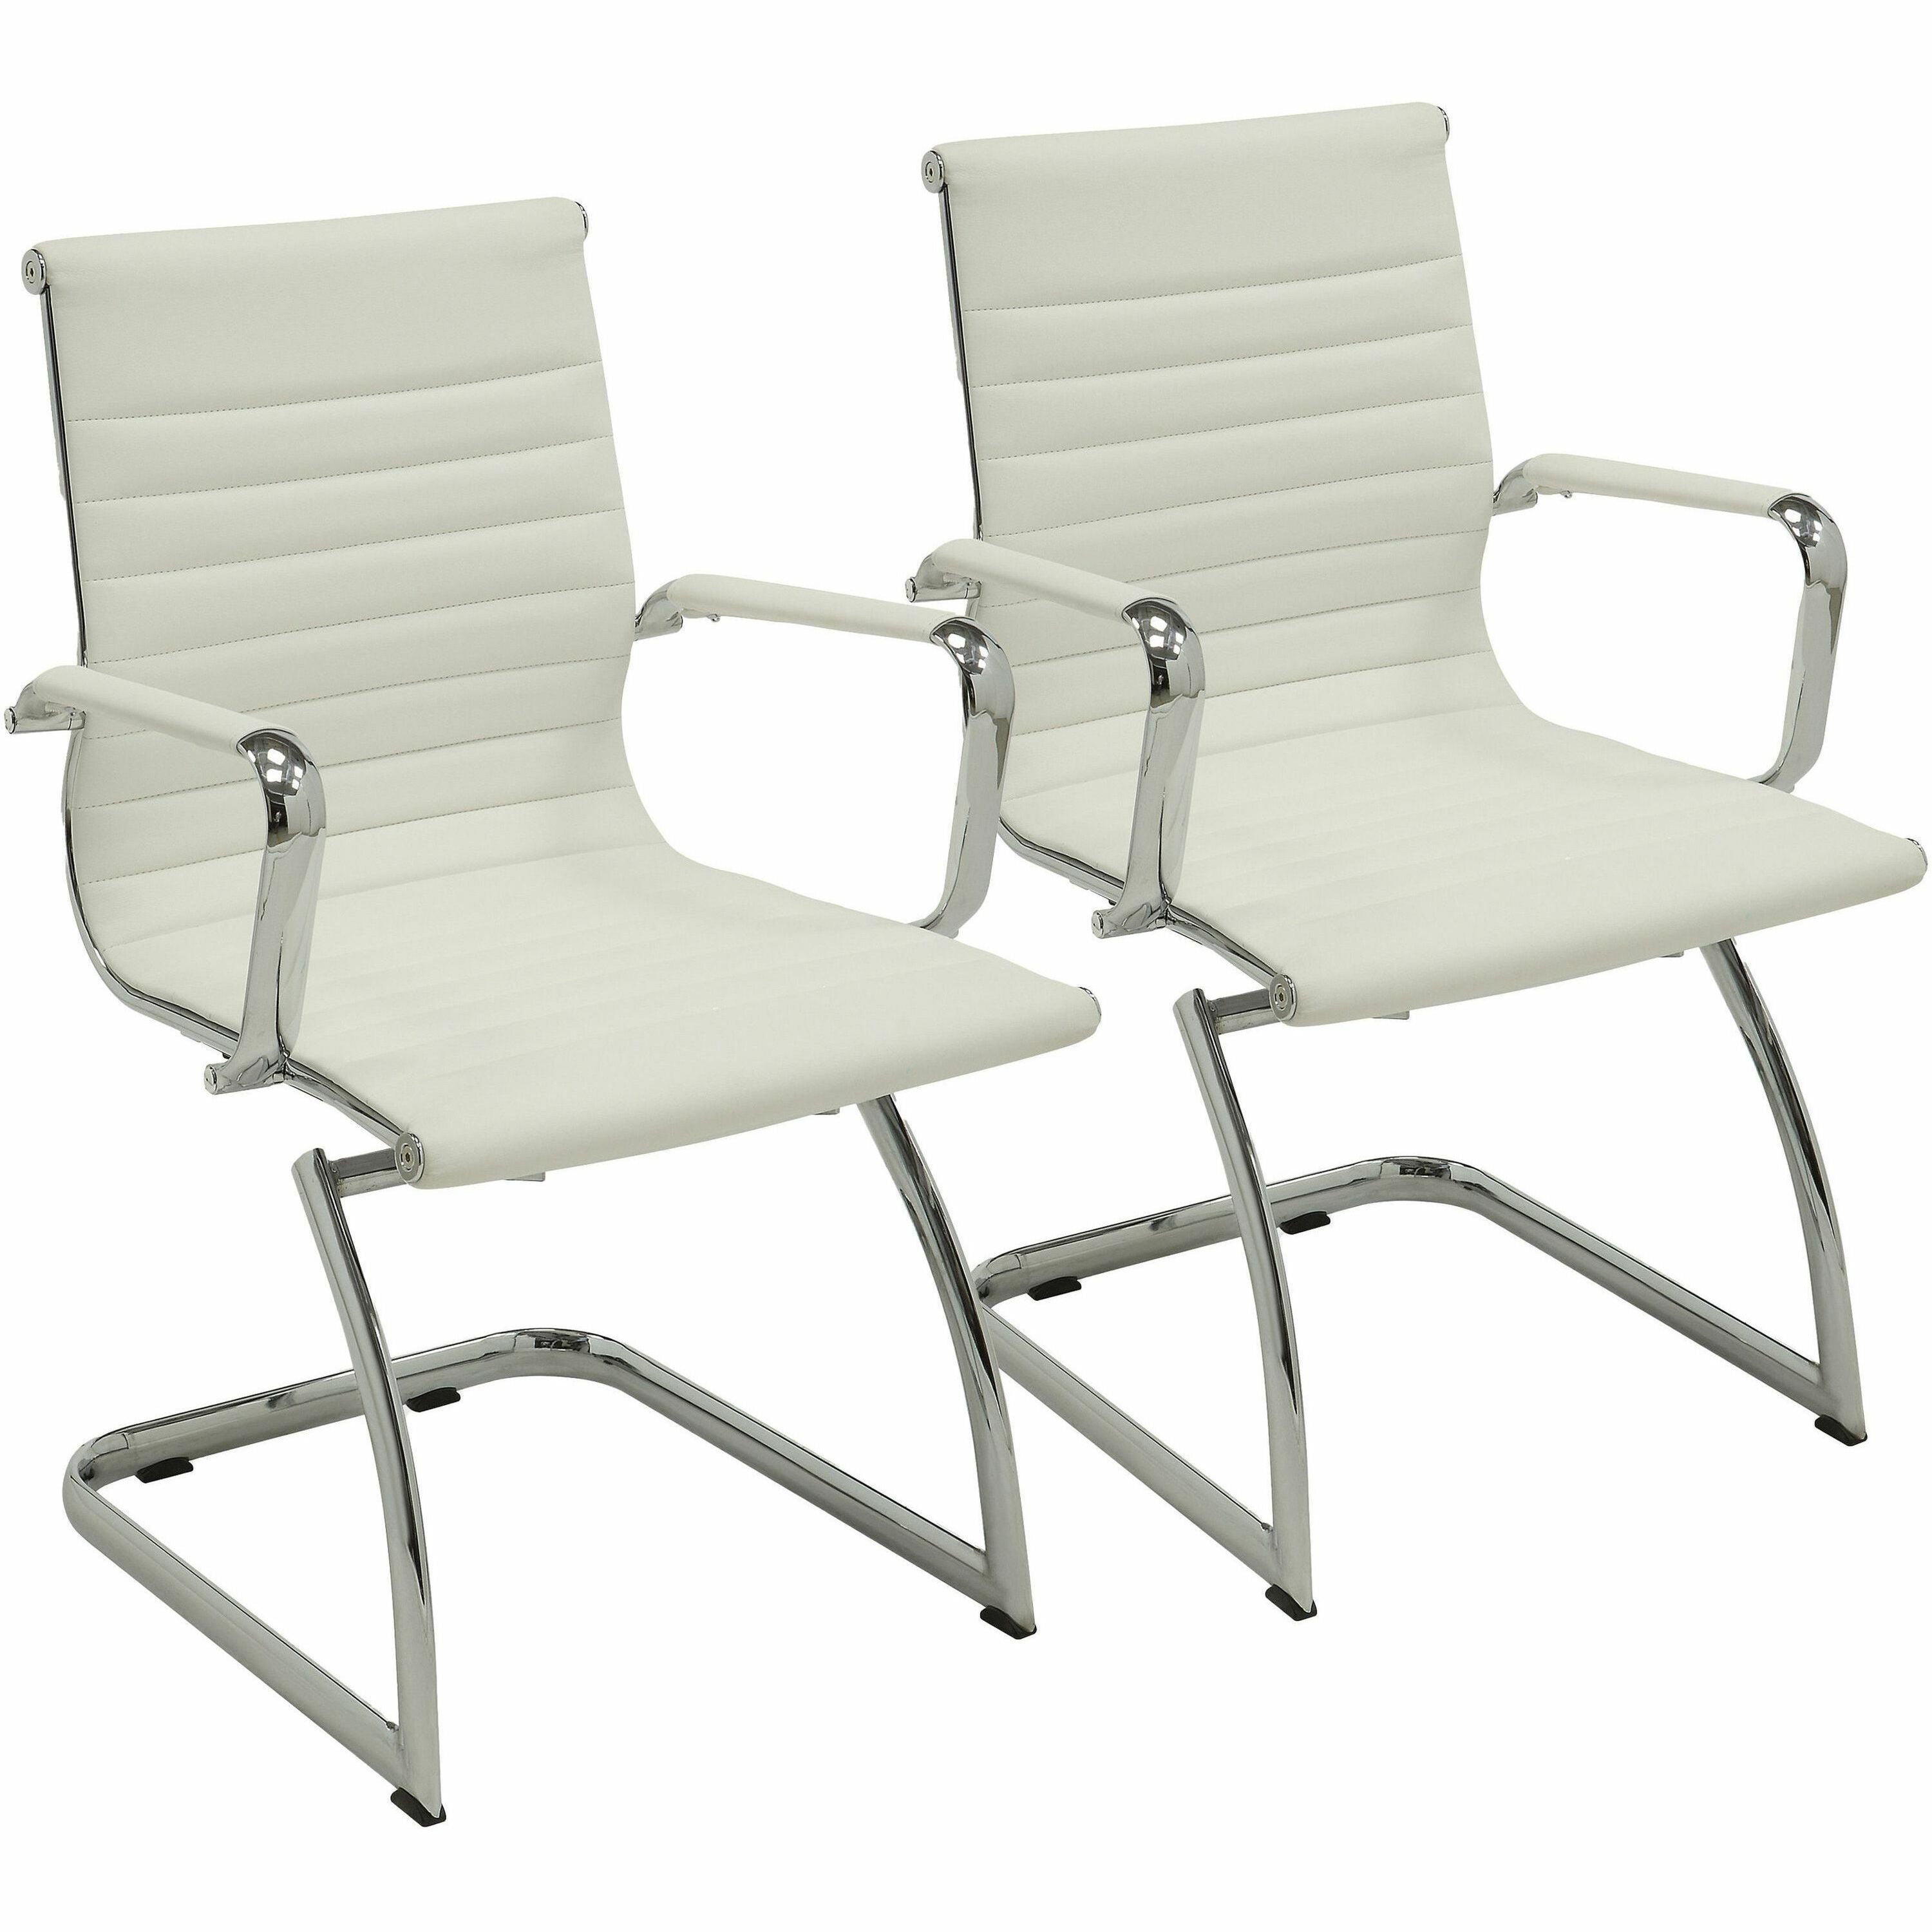 lorell-modern-guest-chairs-bonded-leather-seat-bonded-leather-back-mid-back-cantilever-base-white-leather-2-carton_llr59504 - 1